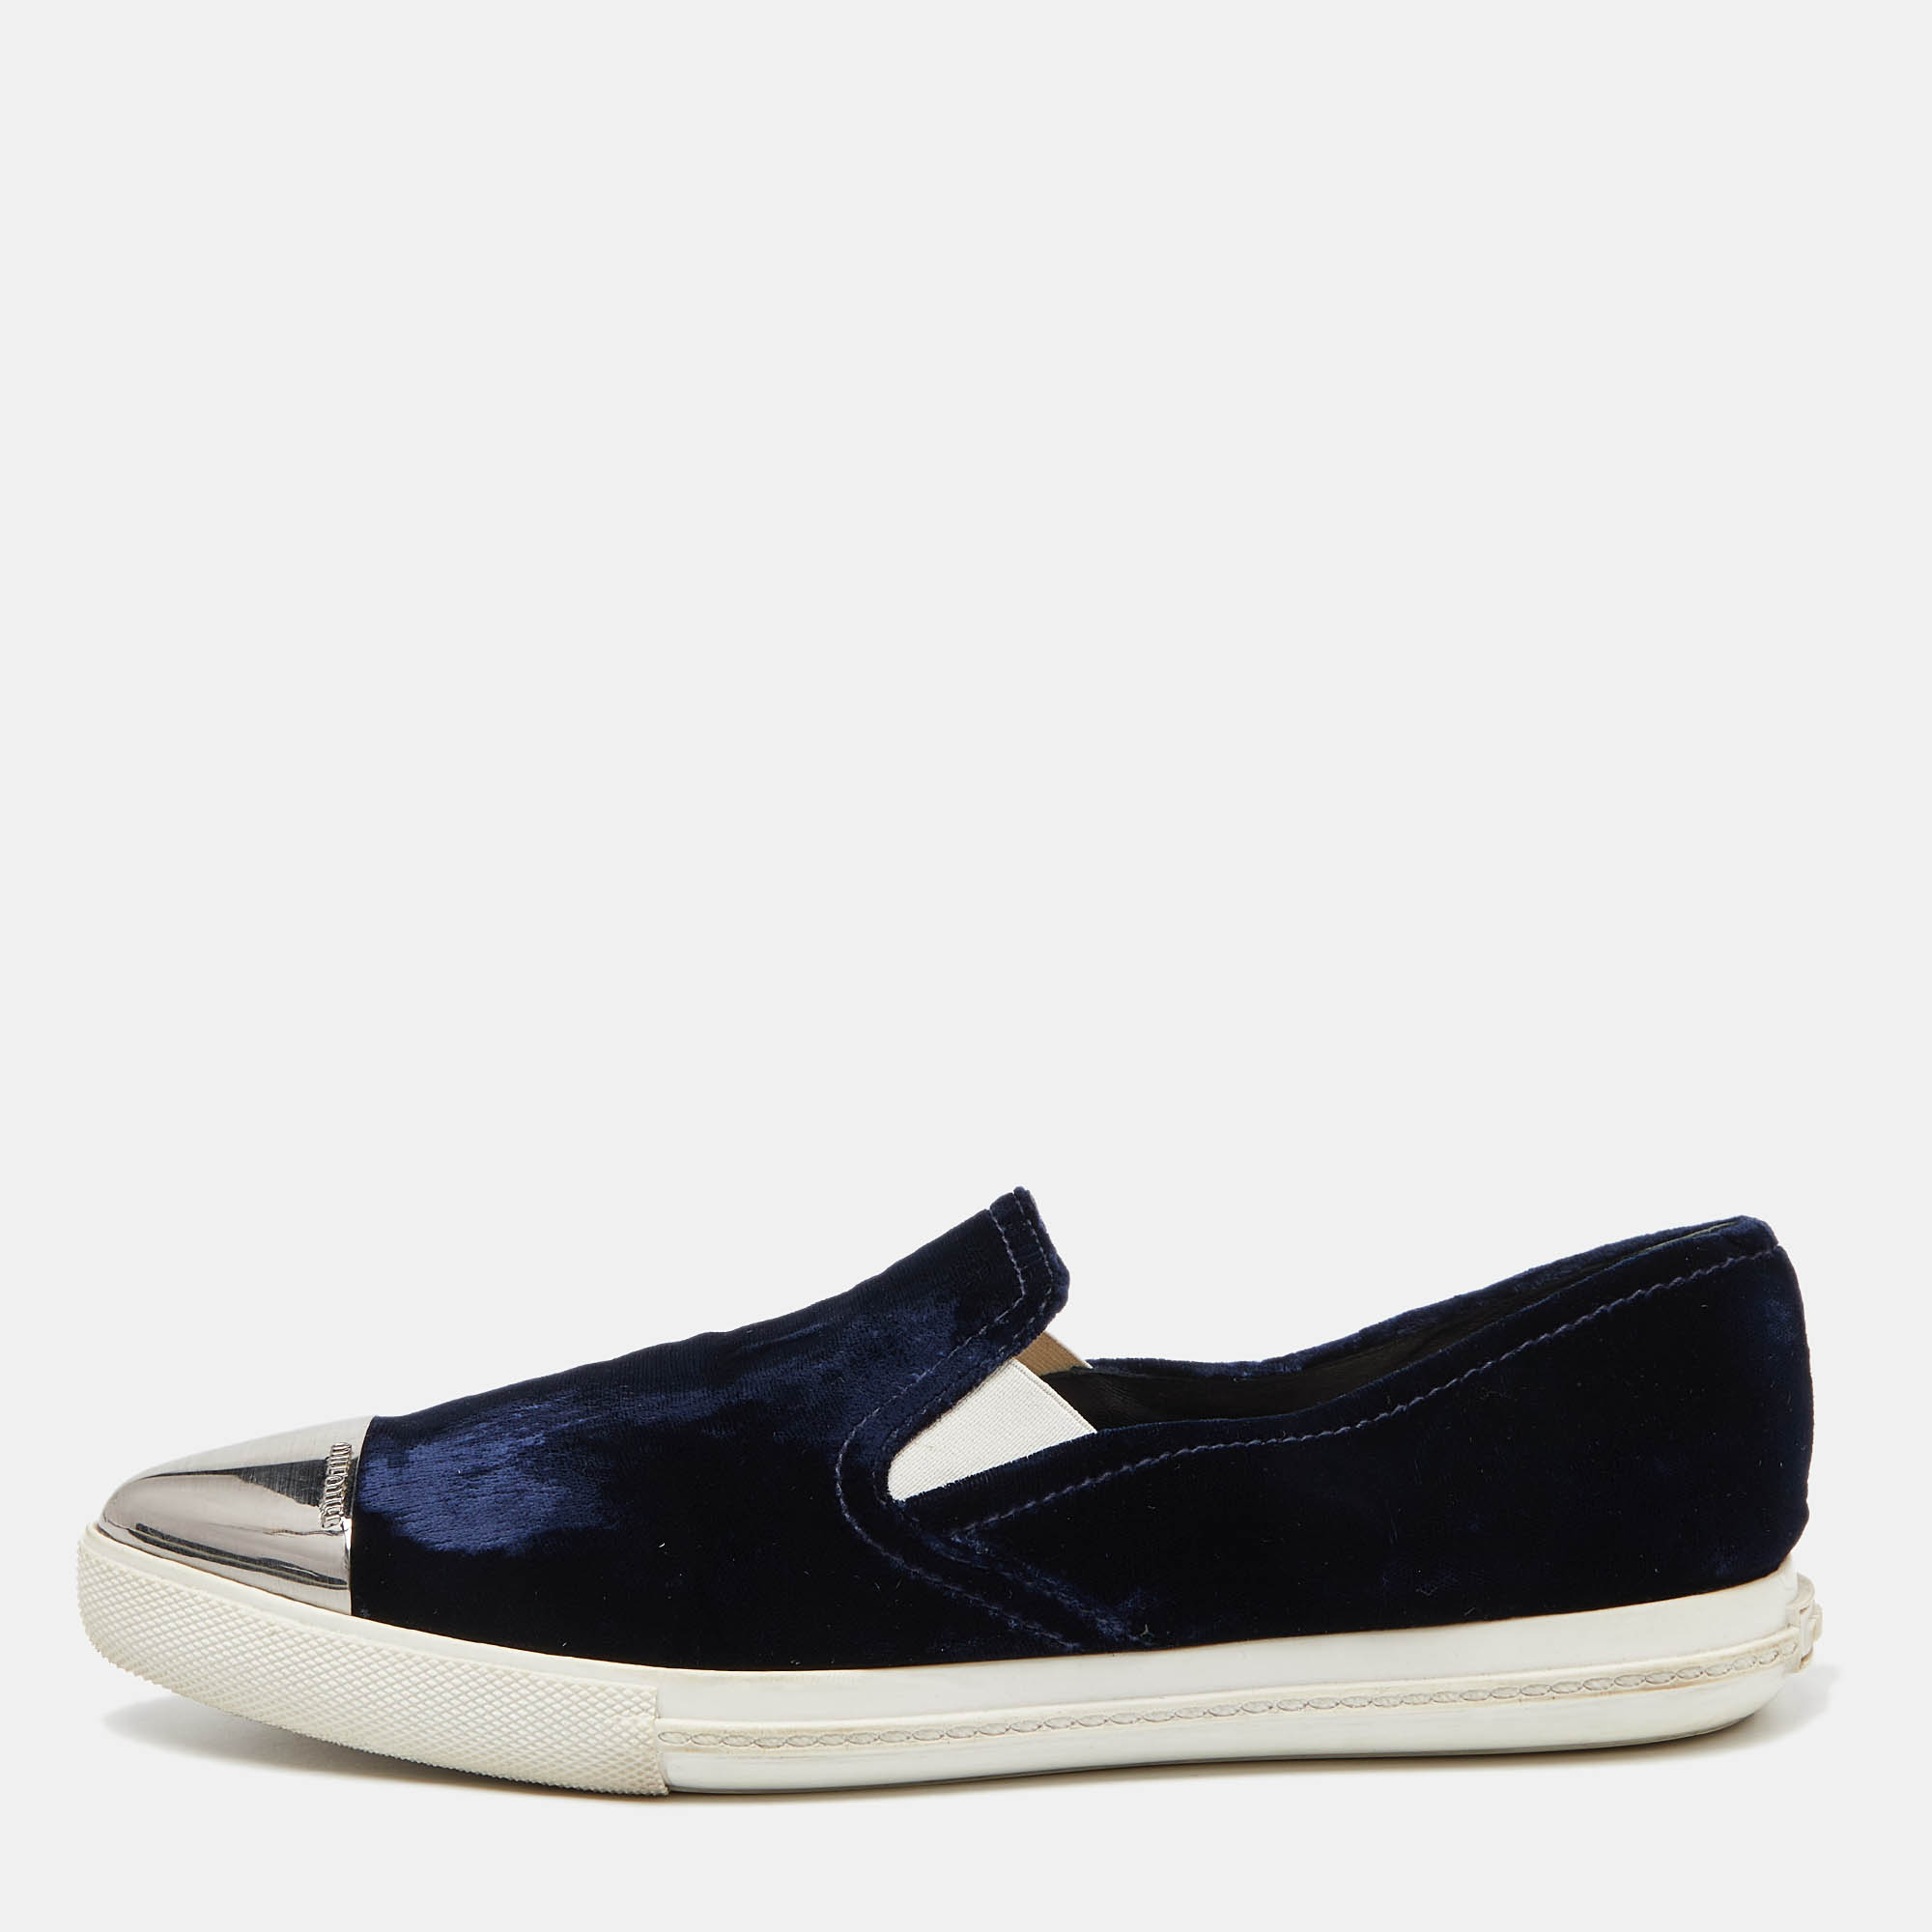 These slip on sneakers from Miu Miu are amazingly stylish The blue sneakers have been crafted from velvet and feature contrasting pointed cap toes. They come equipped with comfortable leather lined insoles and tough rubber soles.